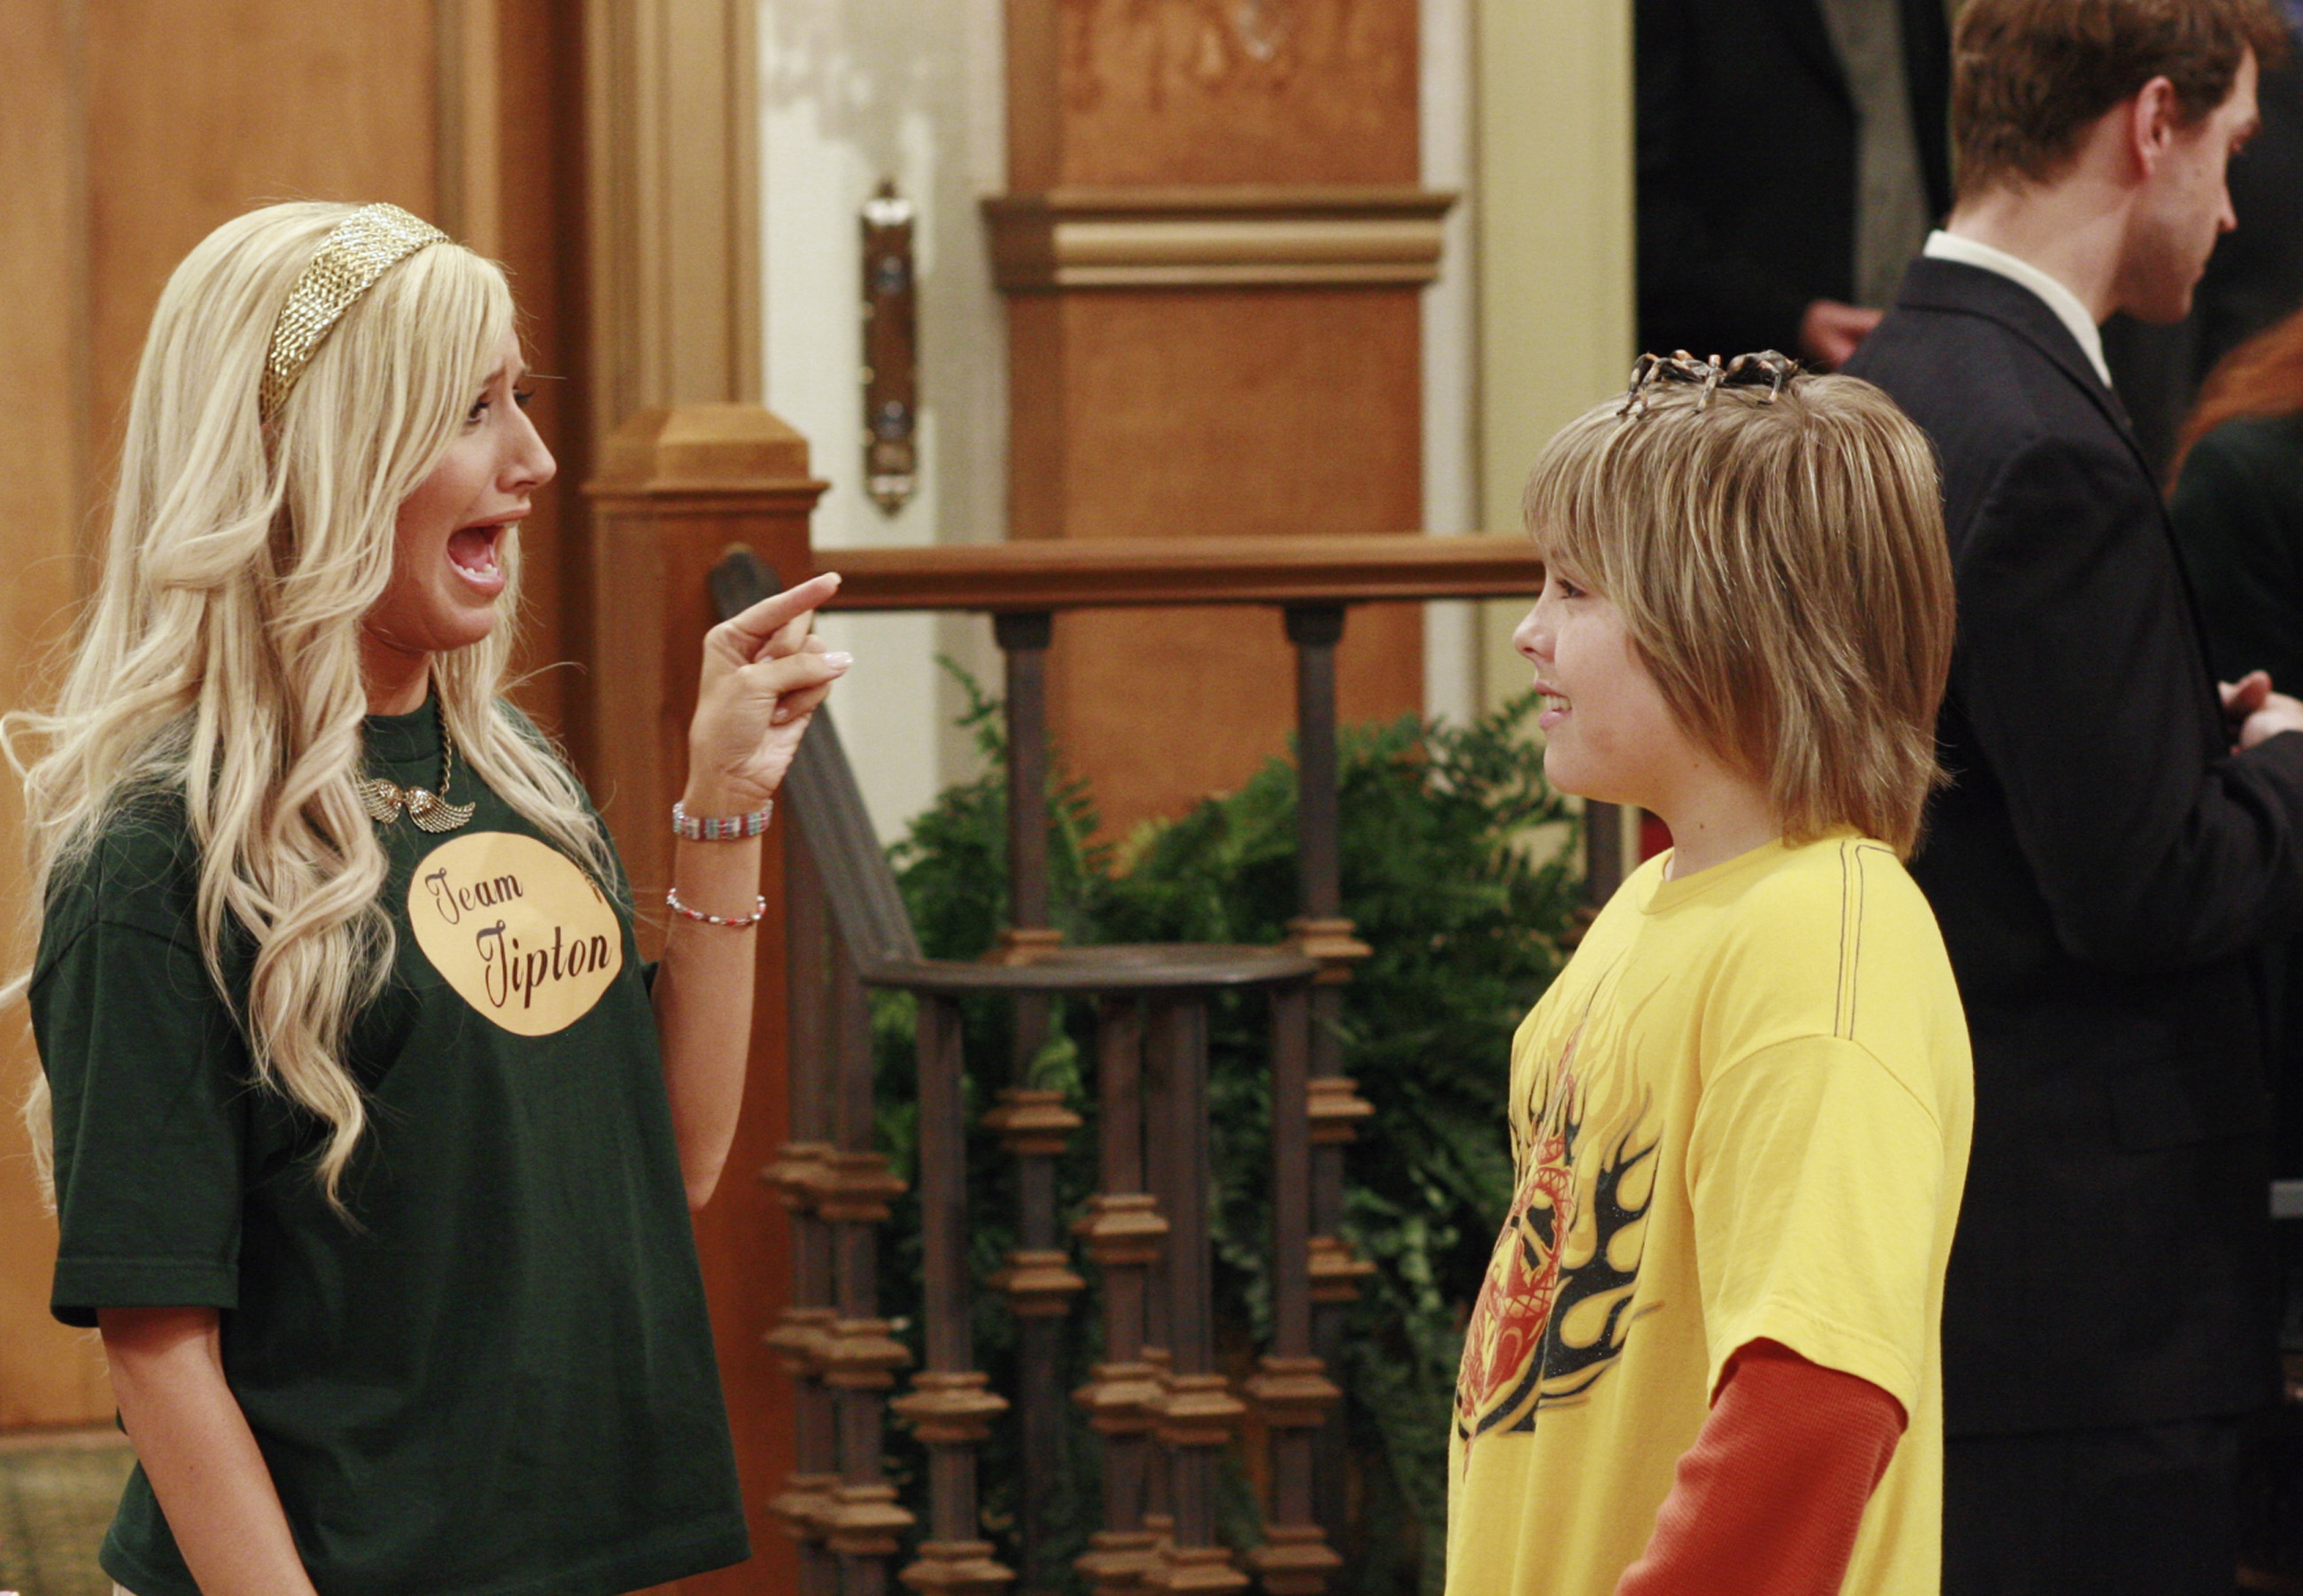 Dylan Sprouse in The Suite Life of Zack and Cody (Season 3)